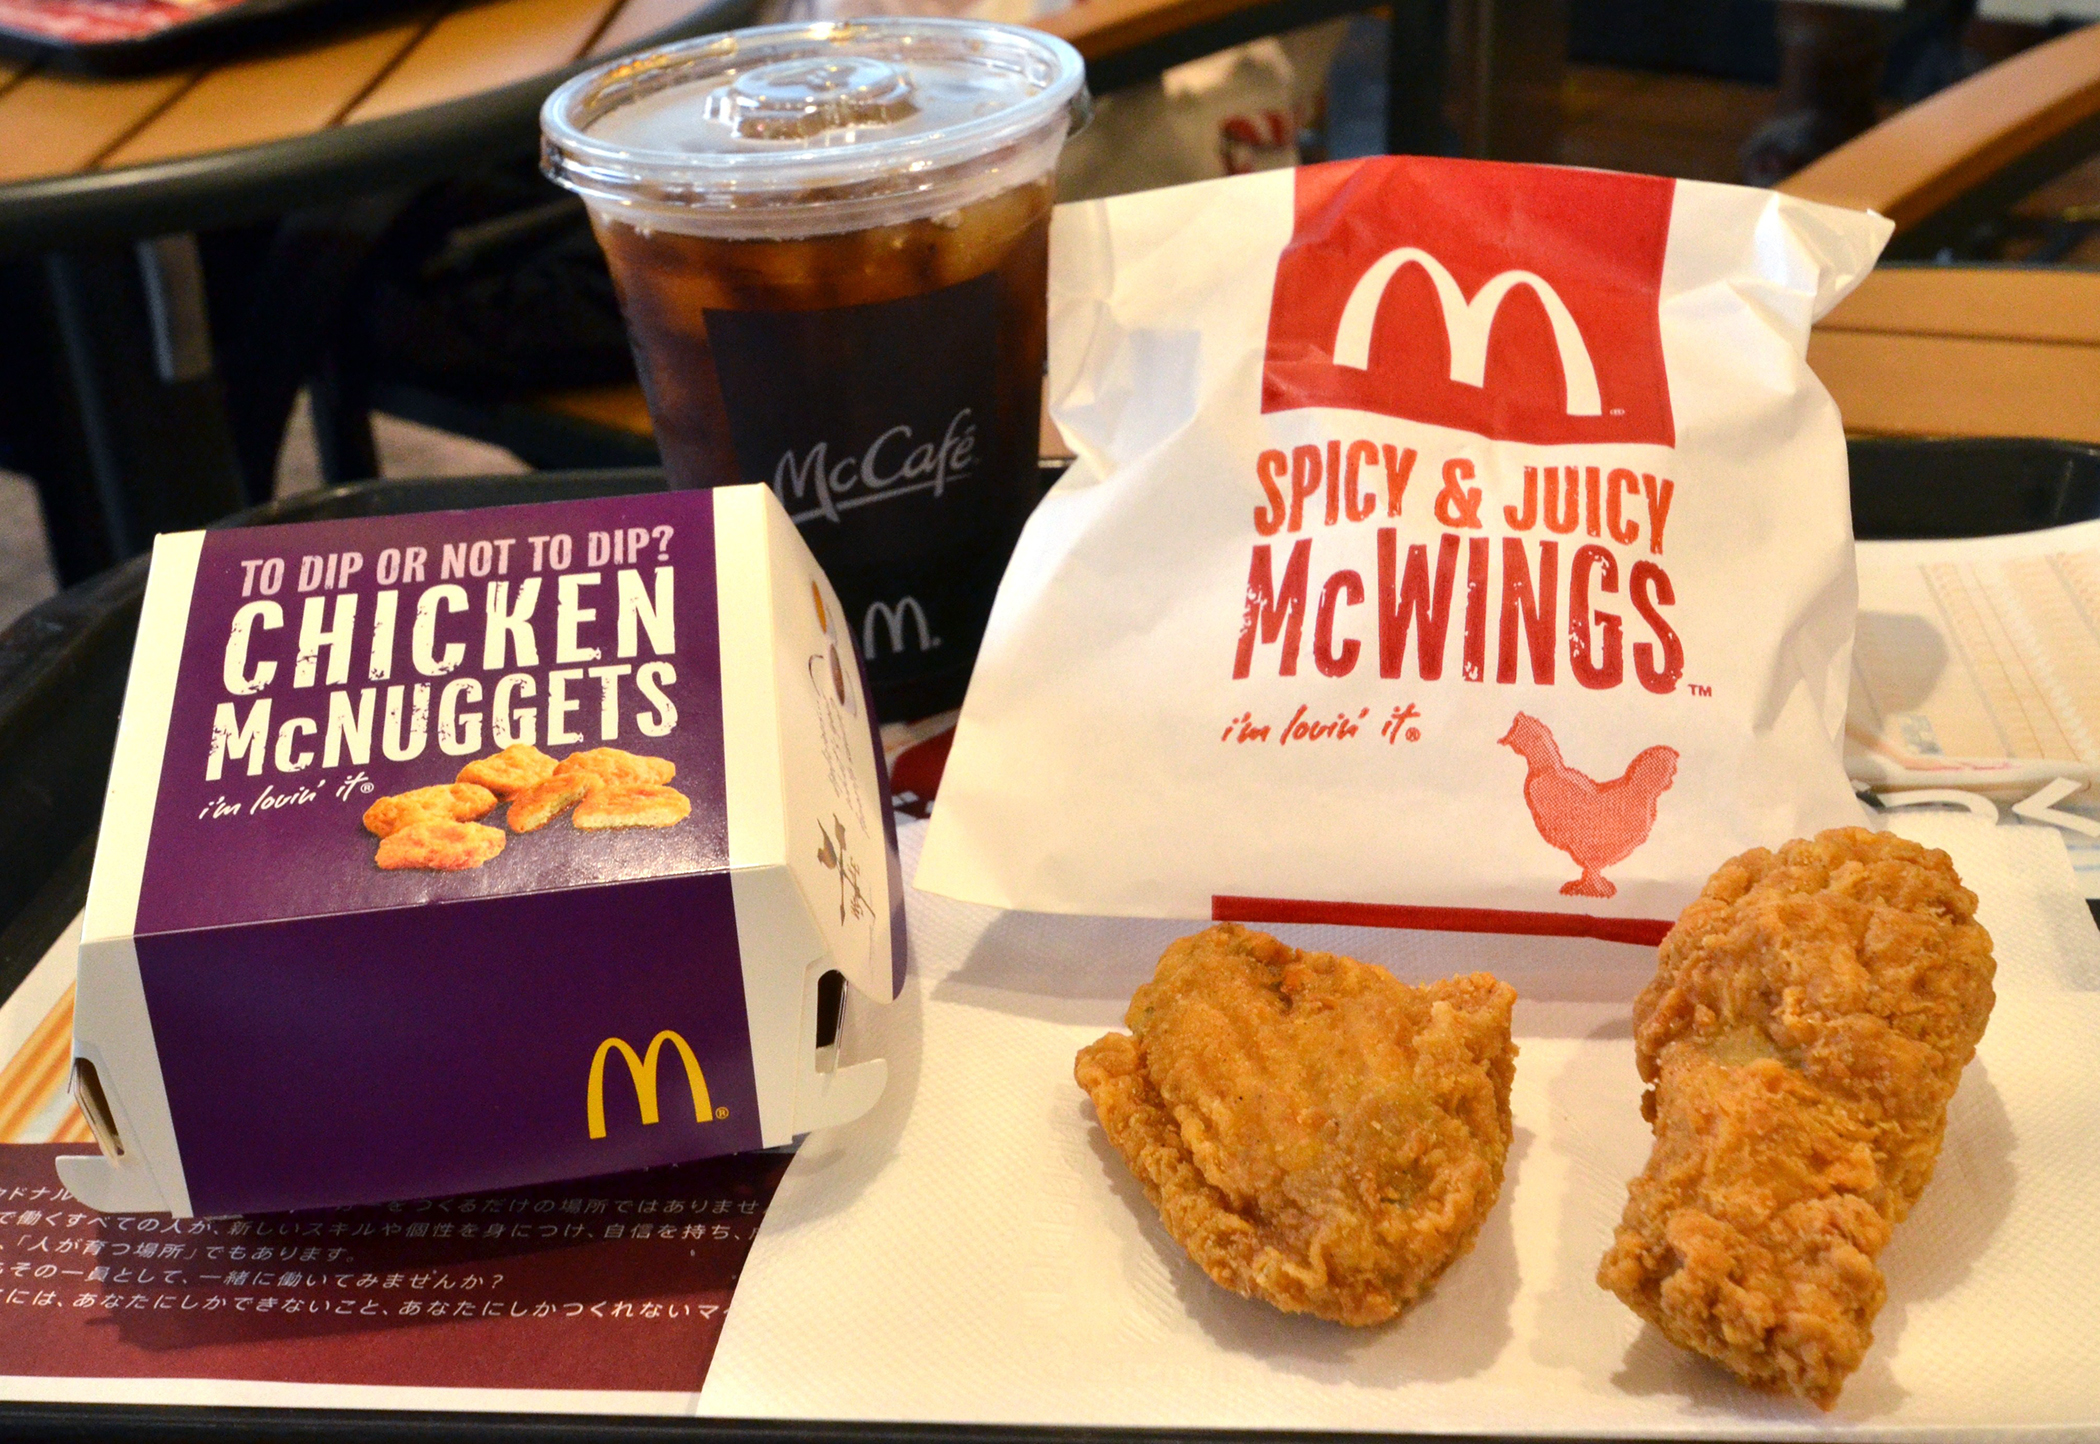 Chicken McNuggets and McWings at a McDonald's restaurant